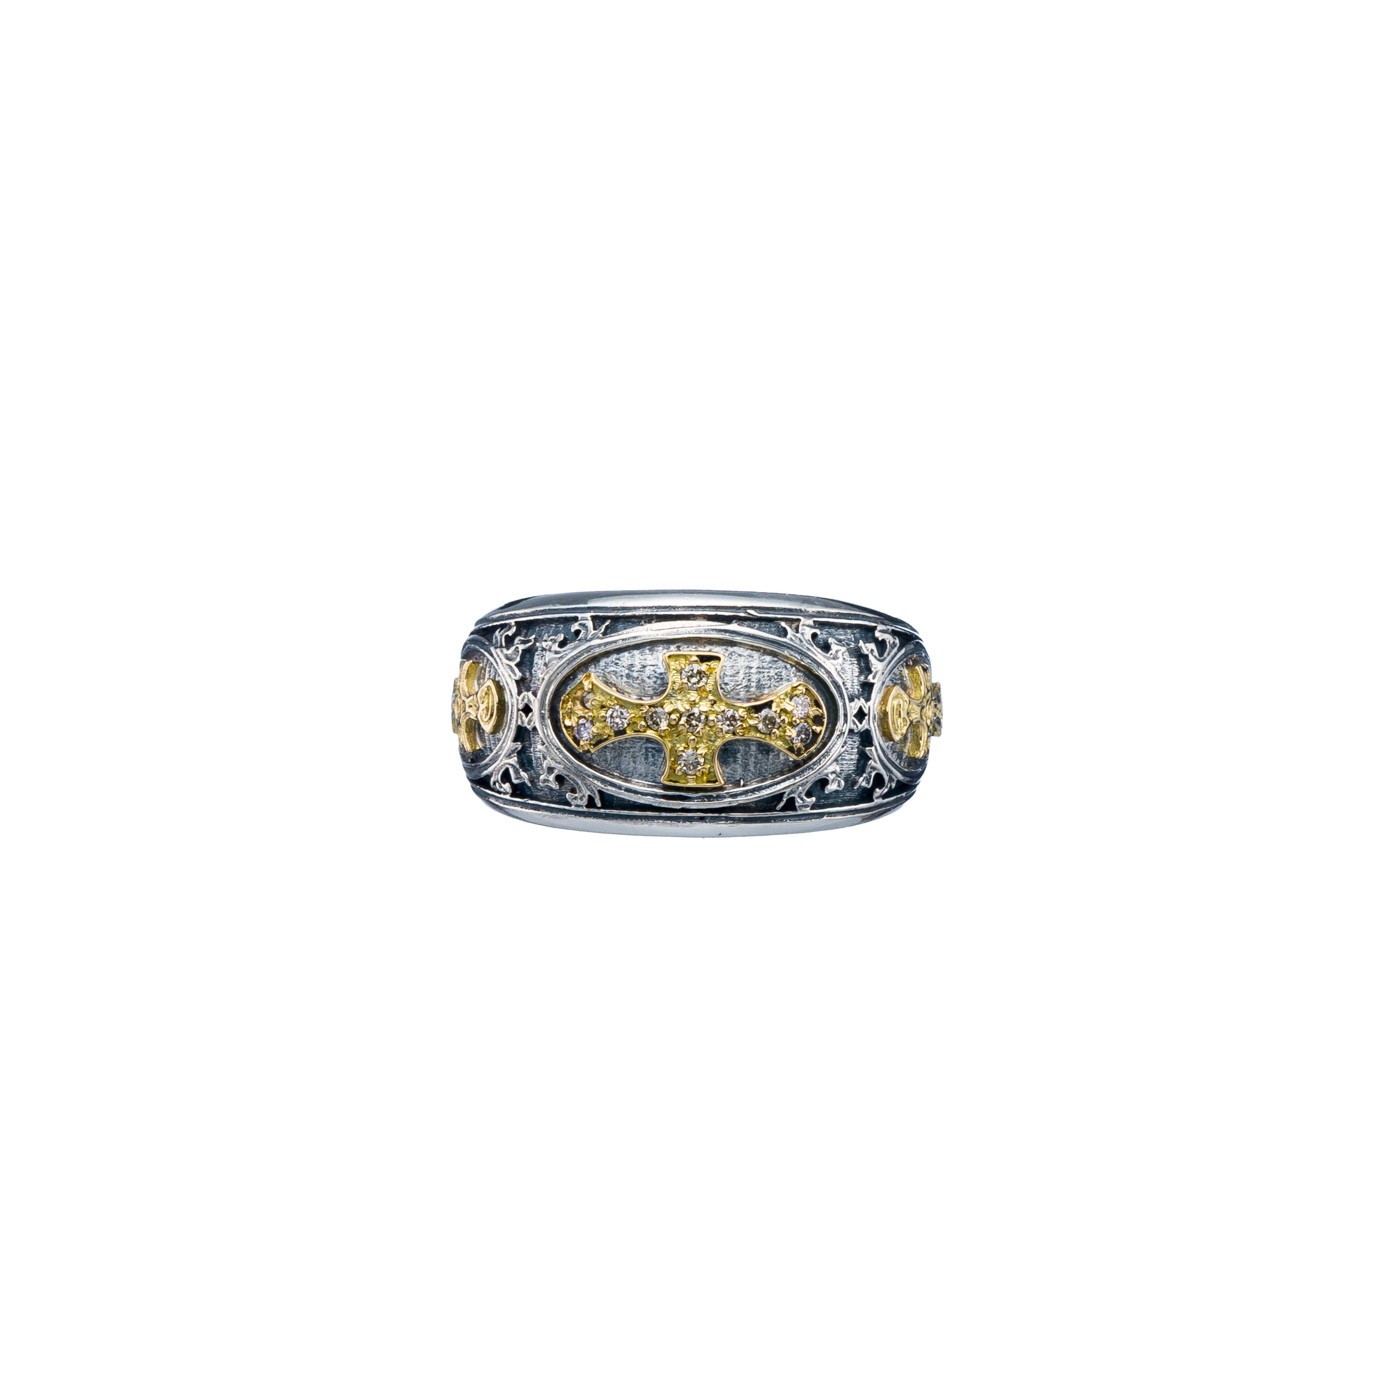 Patmos Ring in 18K Gold and Sterling silver with brown diamonds